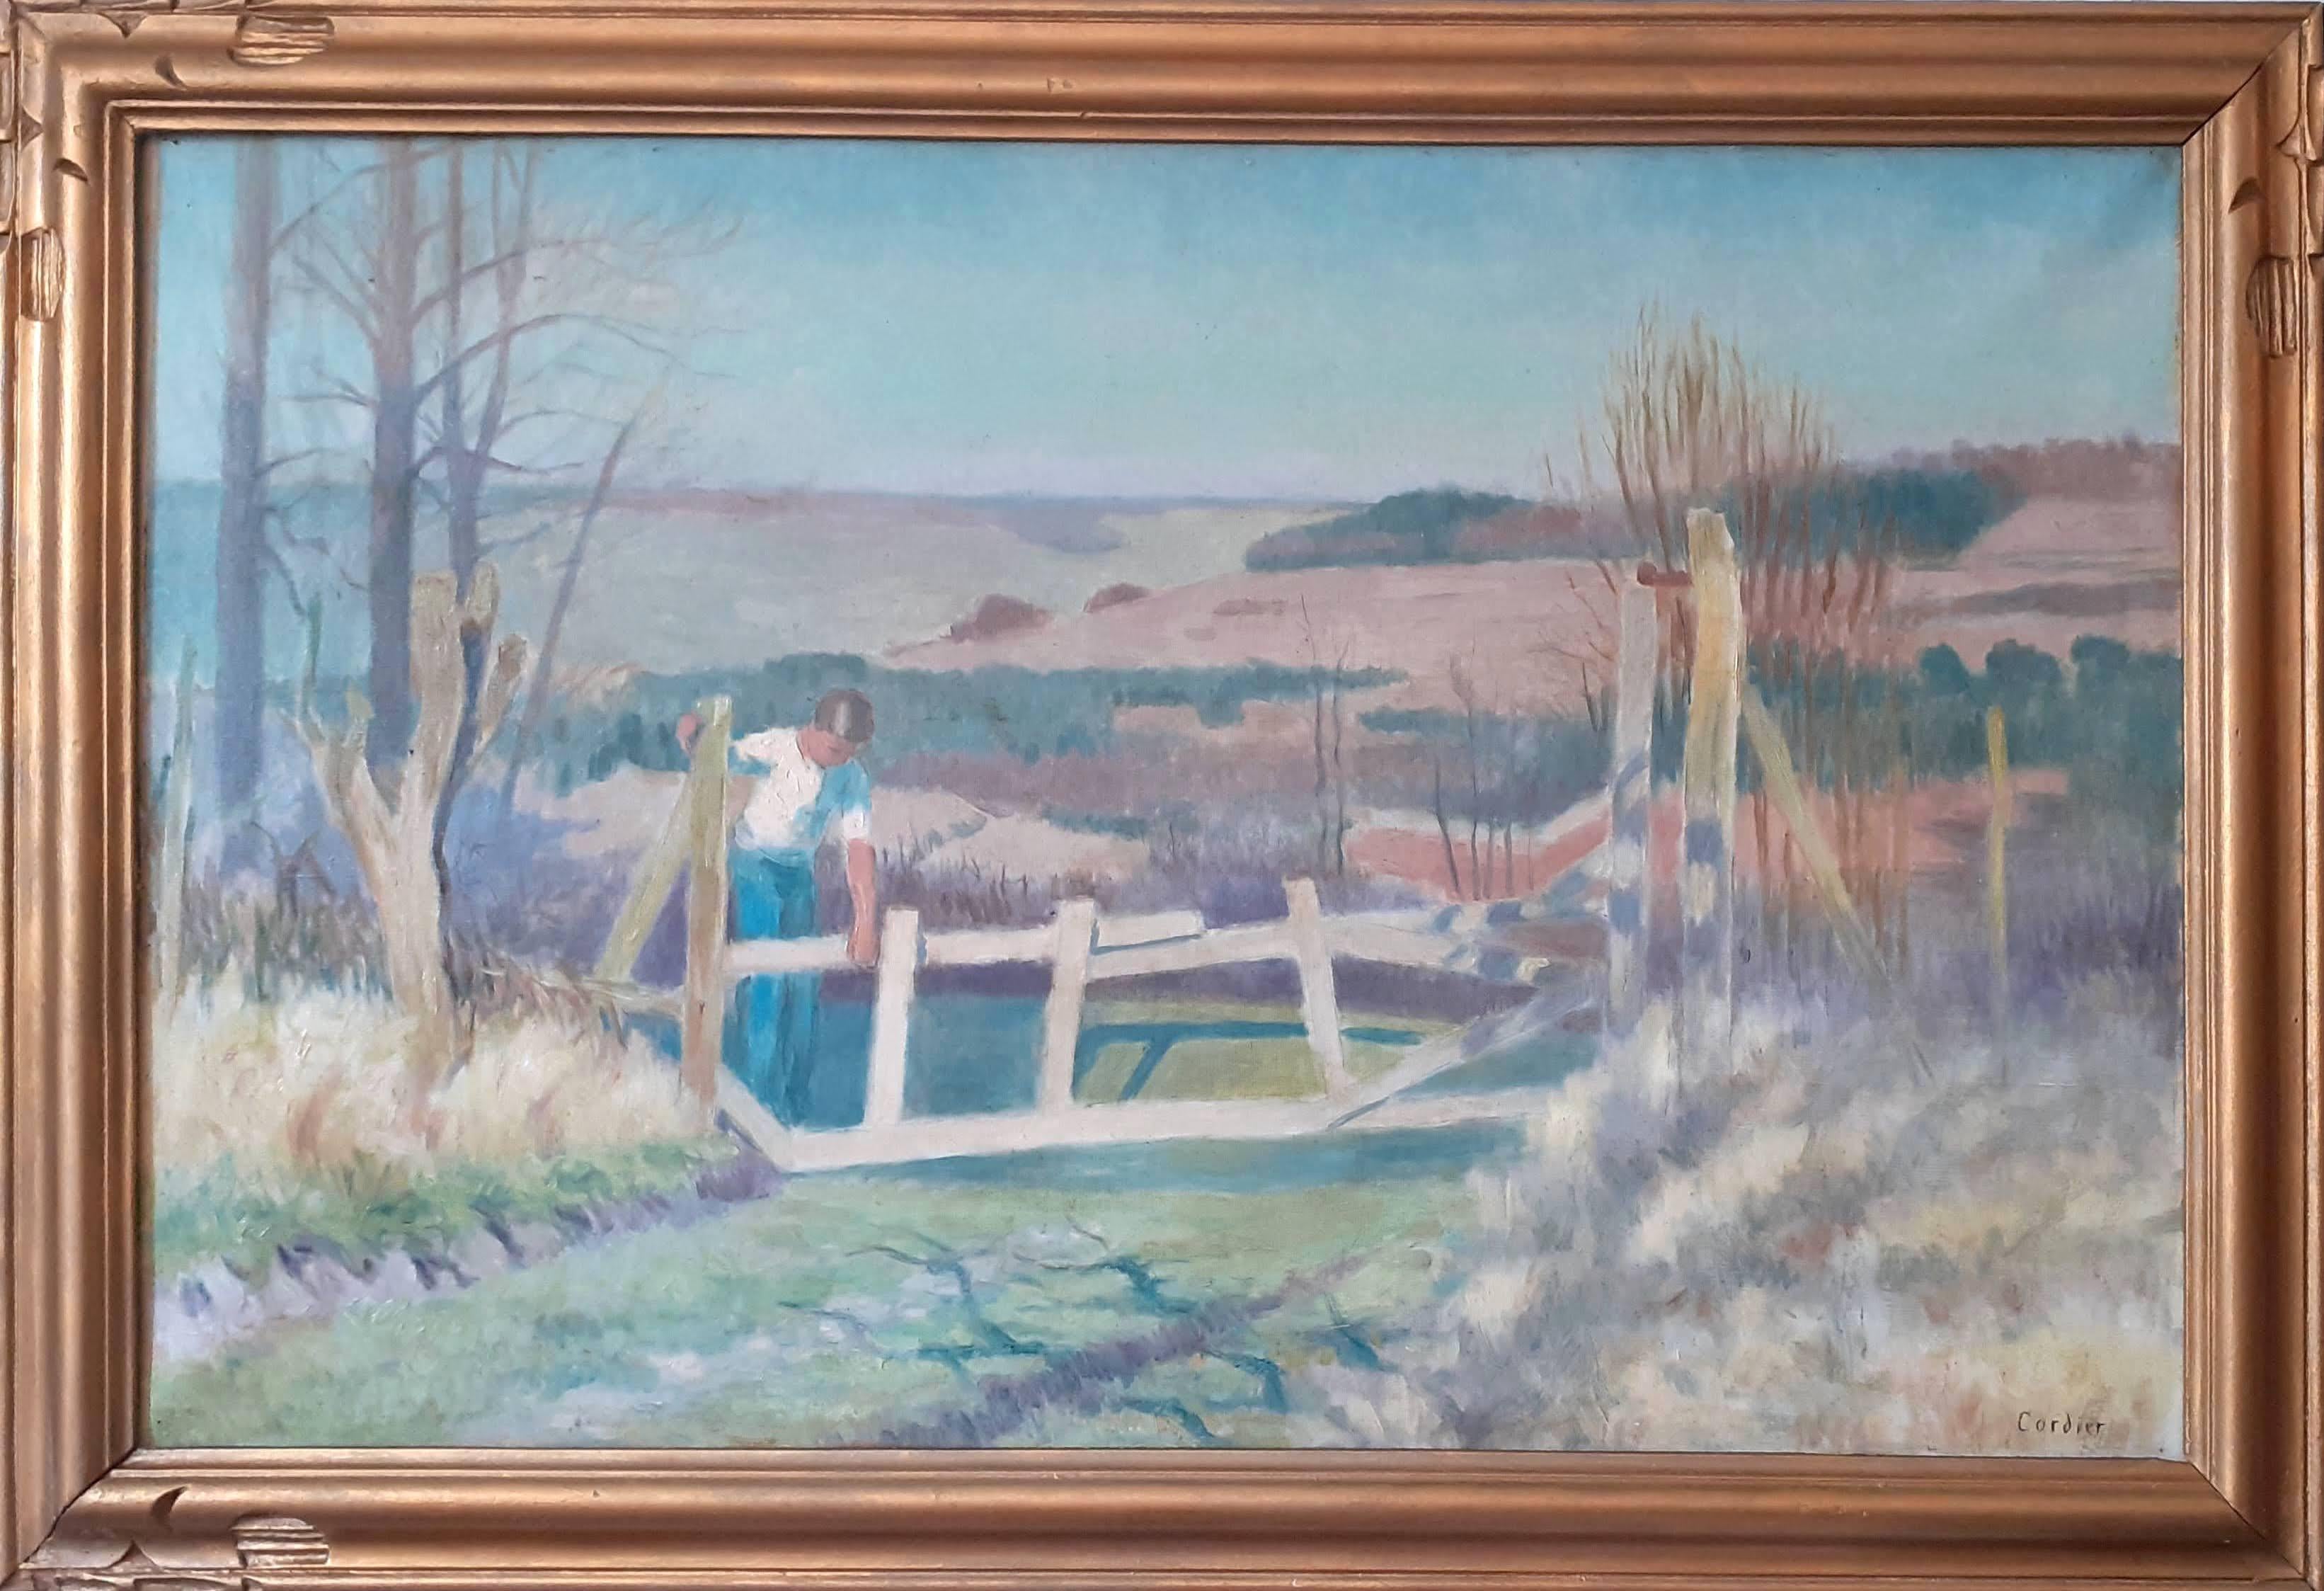 Boy in a landscape, large art deco period painting  - Painting by Eugene Cordier 